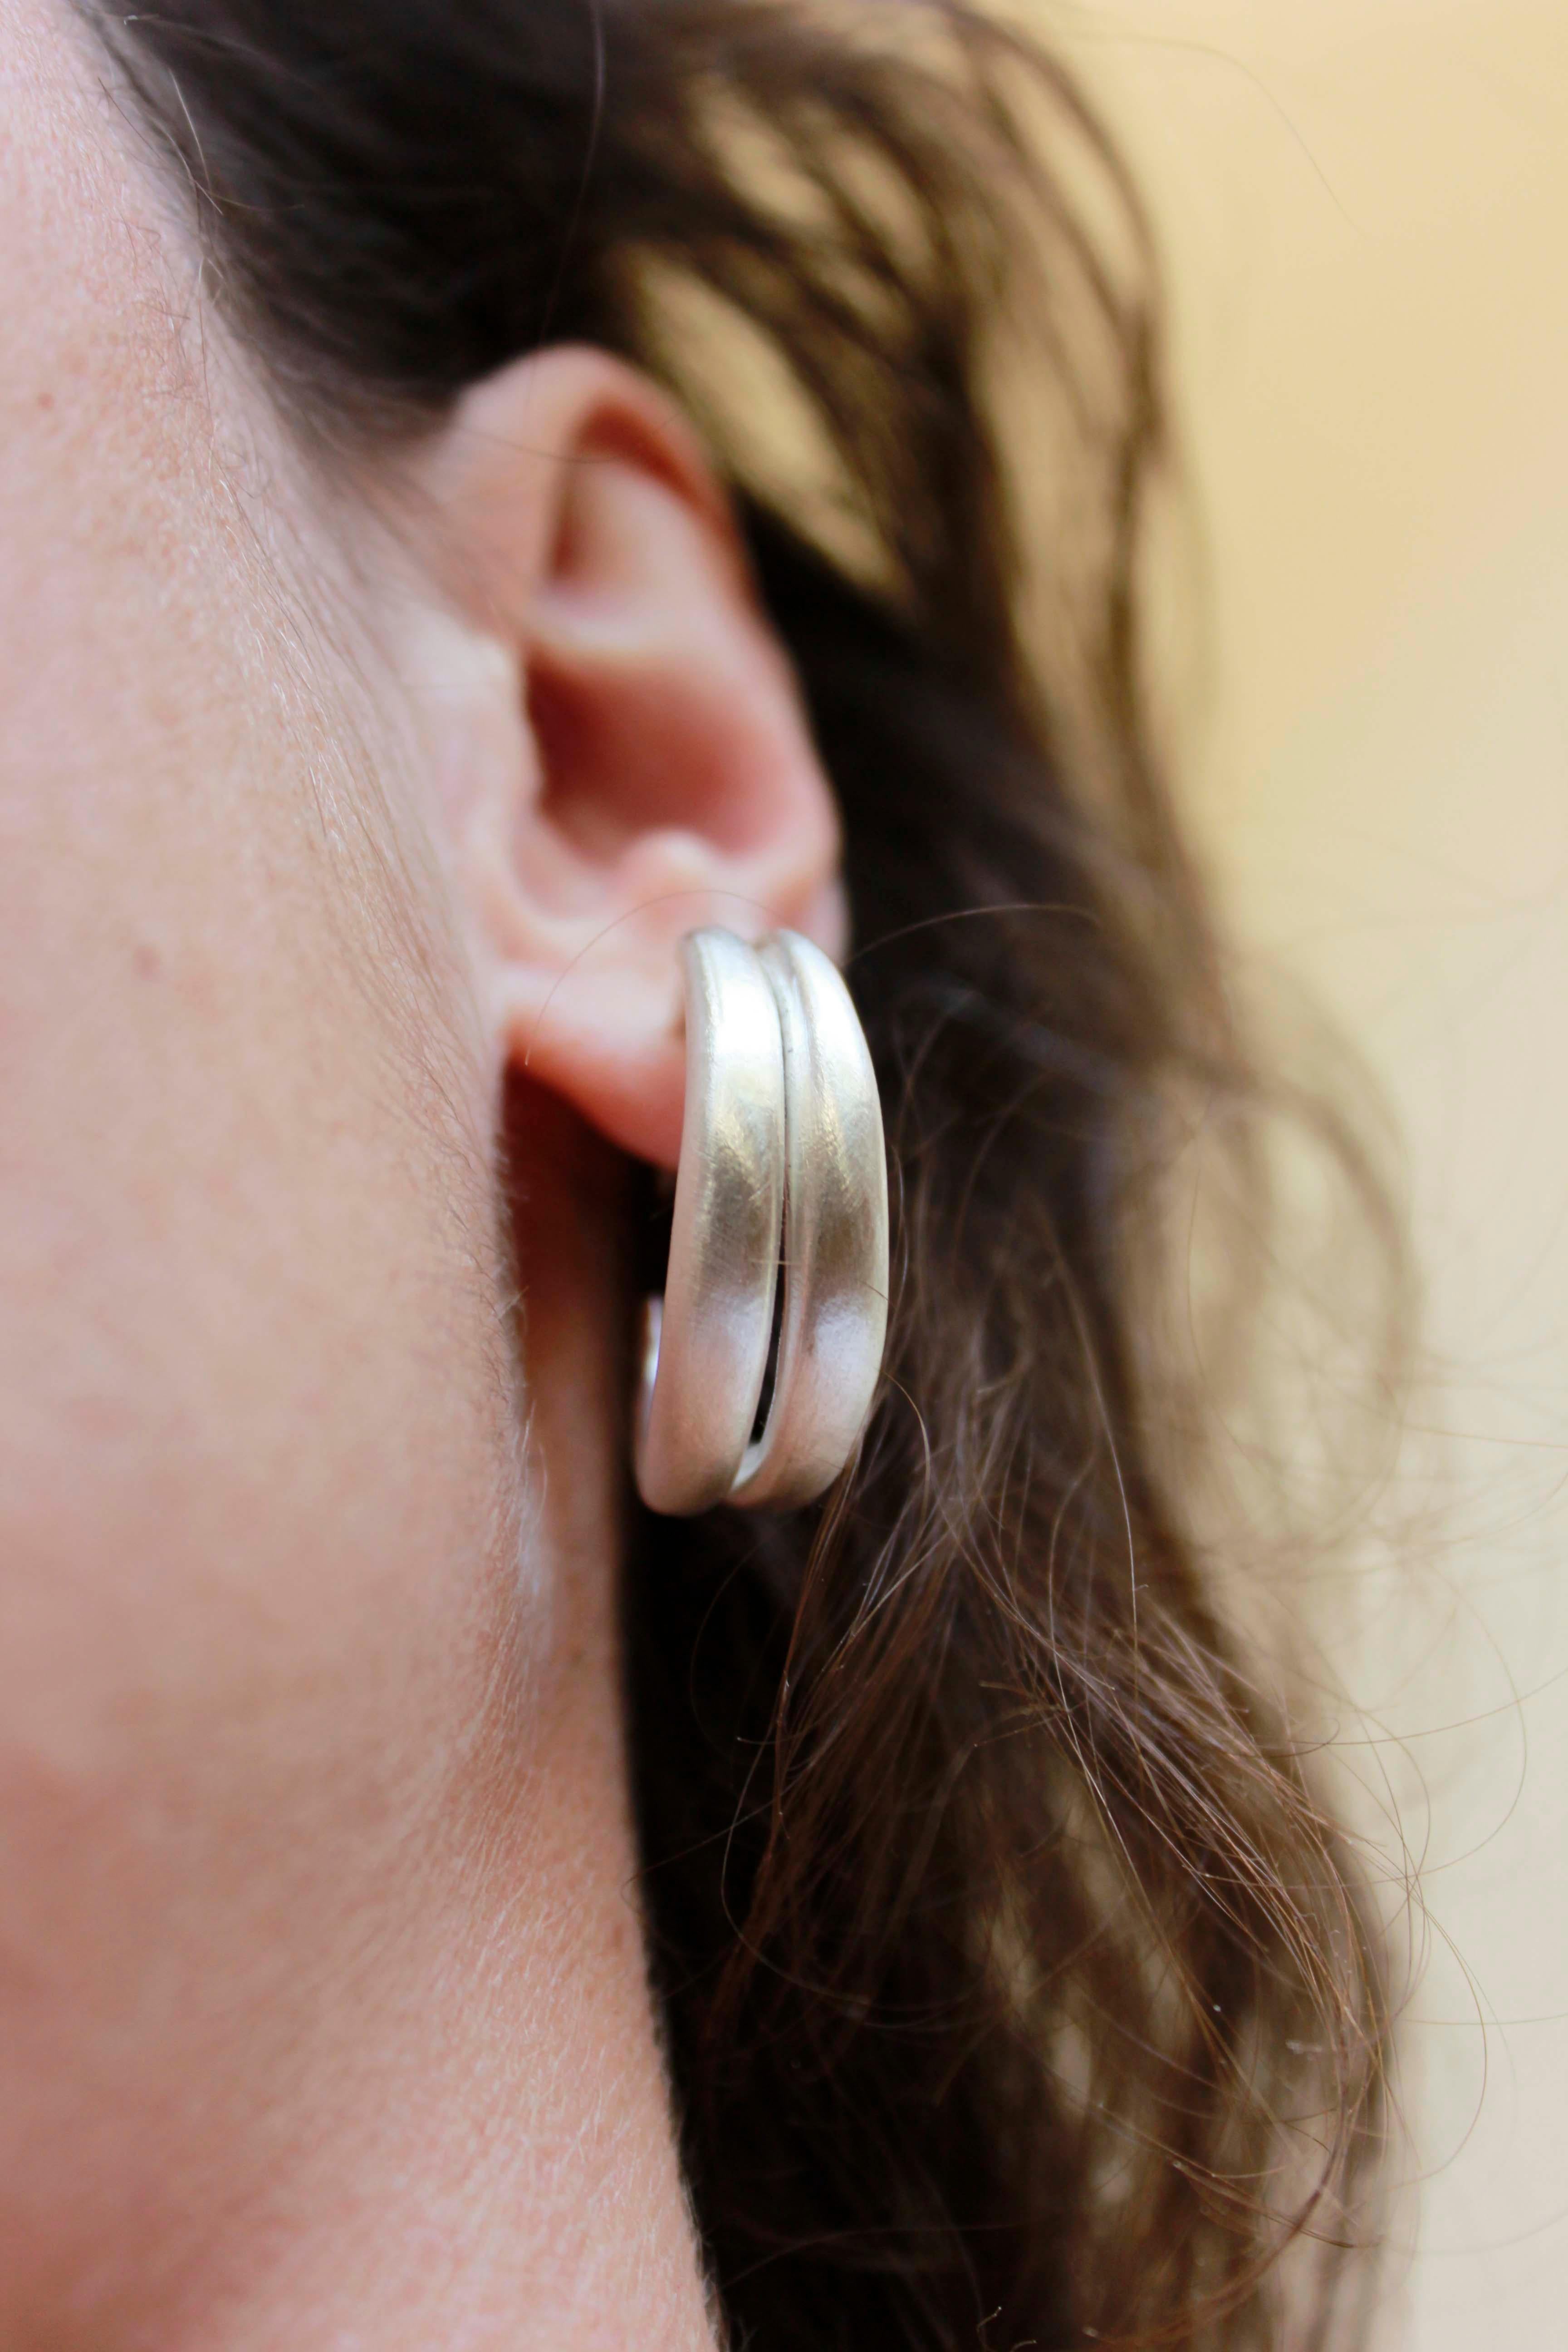 These Chunky hoop Earrings are ideal for adding a bold detail to your everyday outfit.

Made from fine silver, they are lightweight, which means you can enjoy them all day long.

The earrings consist of two hoops soldered together. Each piece is